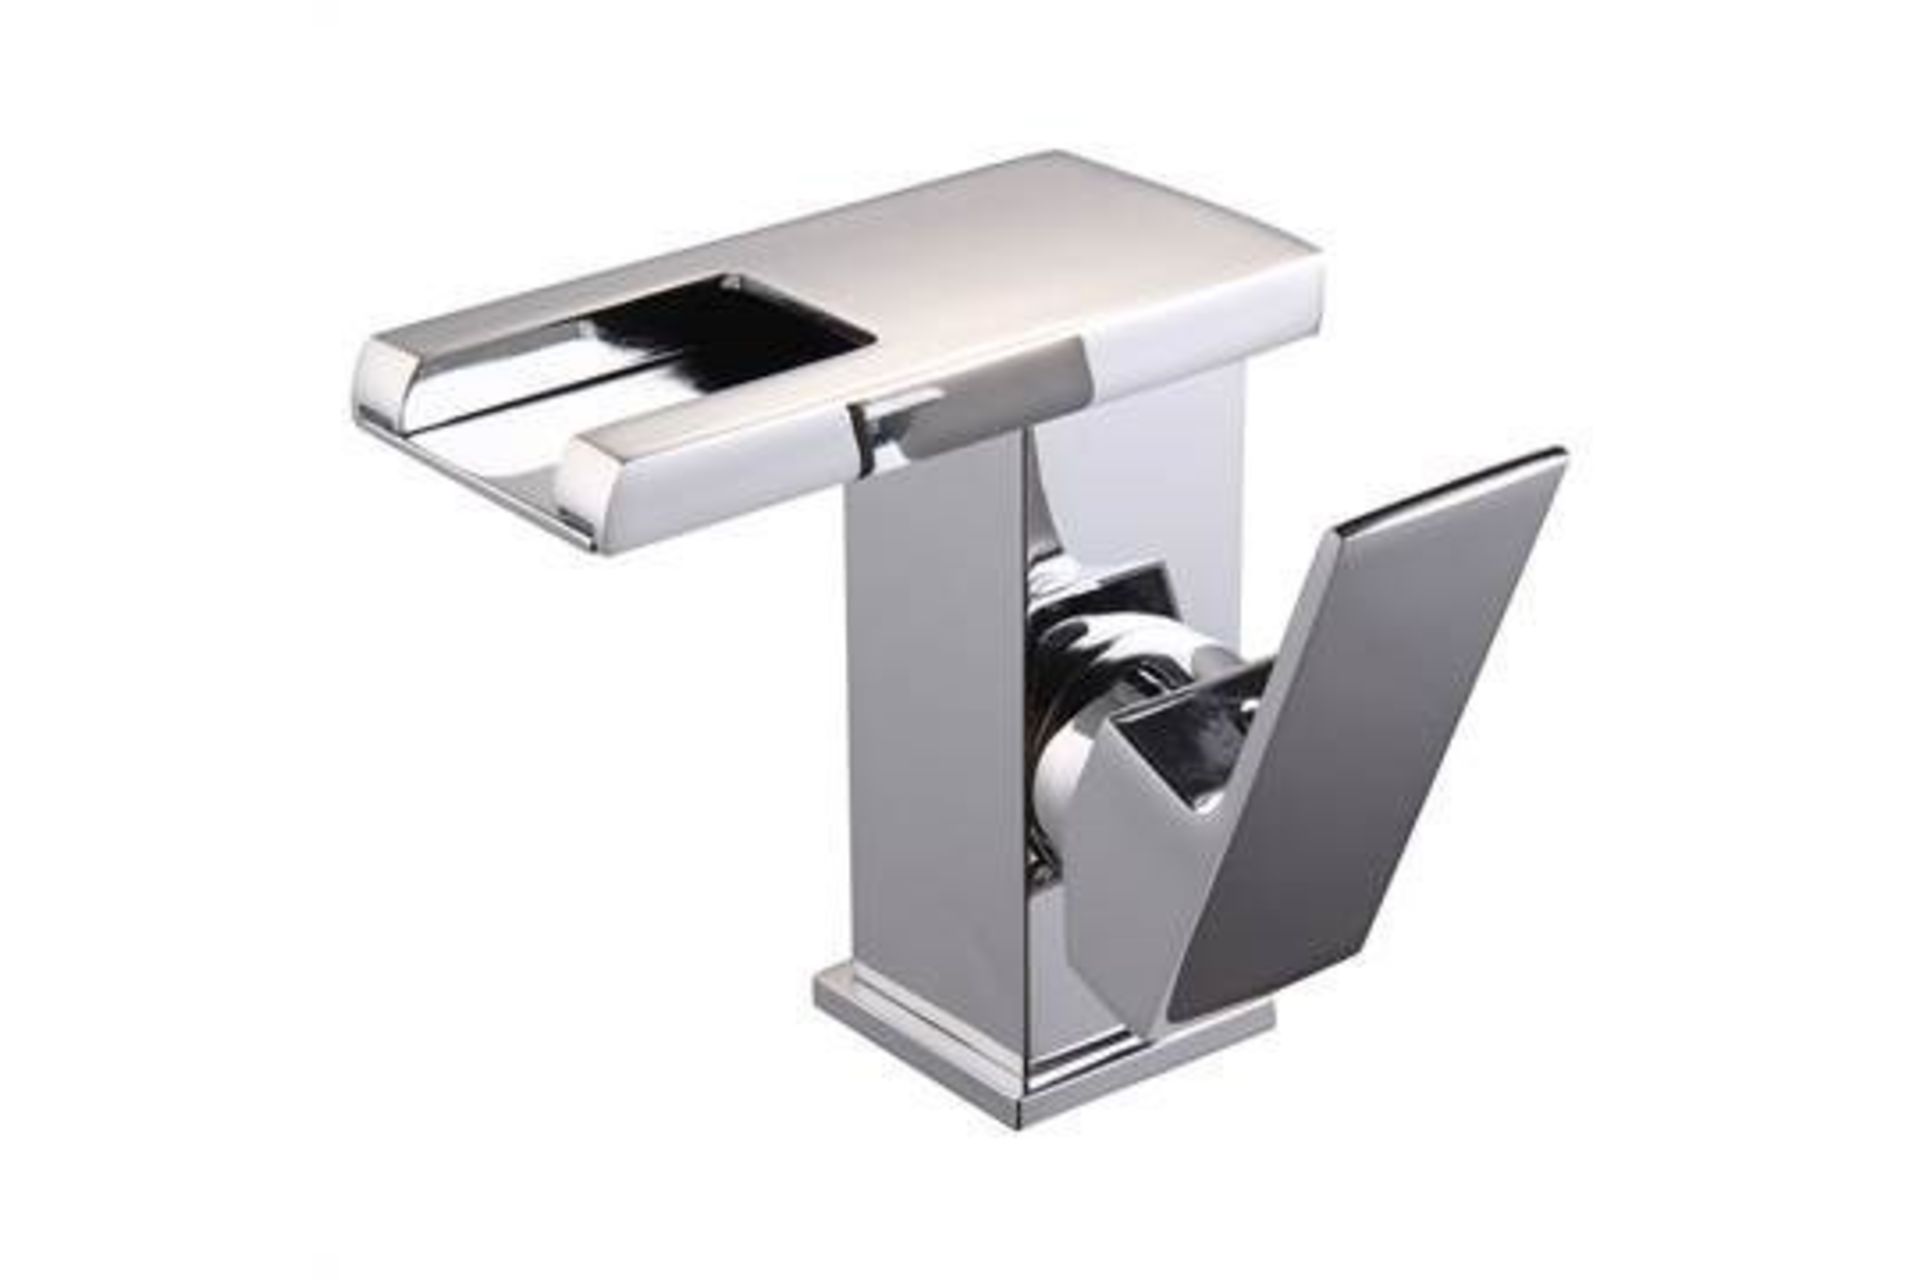 LED Waterfall Bathroom Basin Mixer Tap. RRP £229.99. Easy to install and clean. All copper mounting - Image 5 of 6